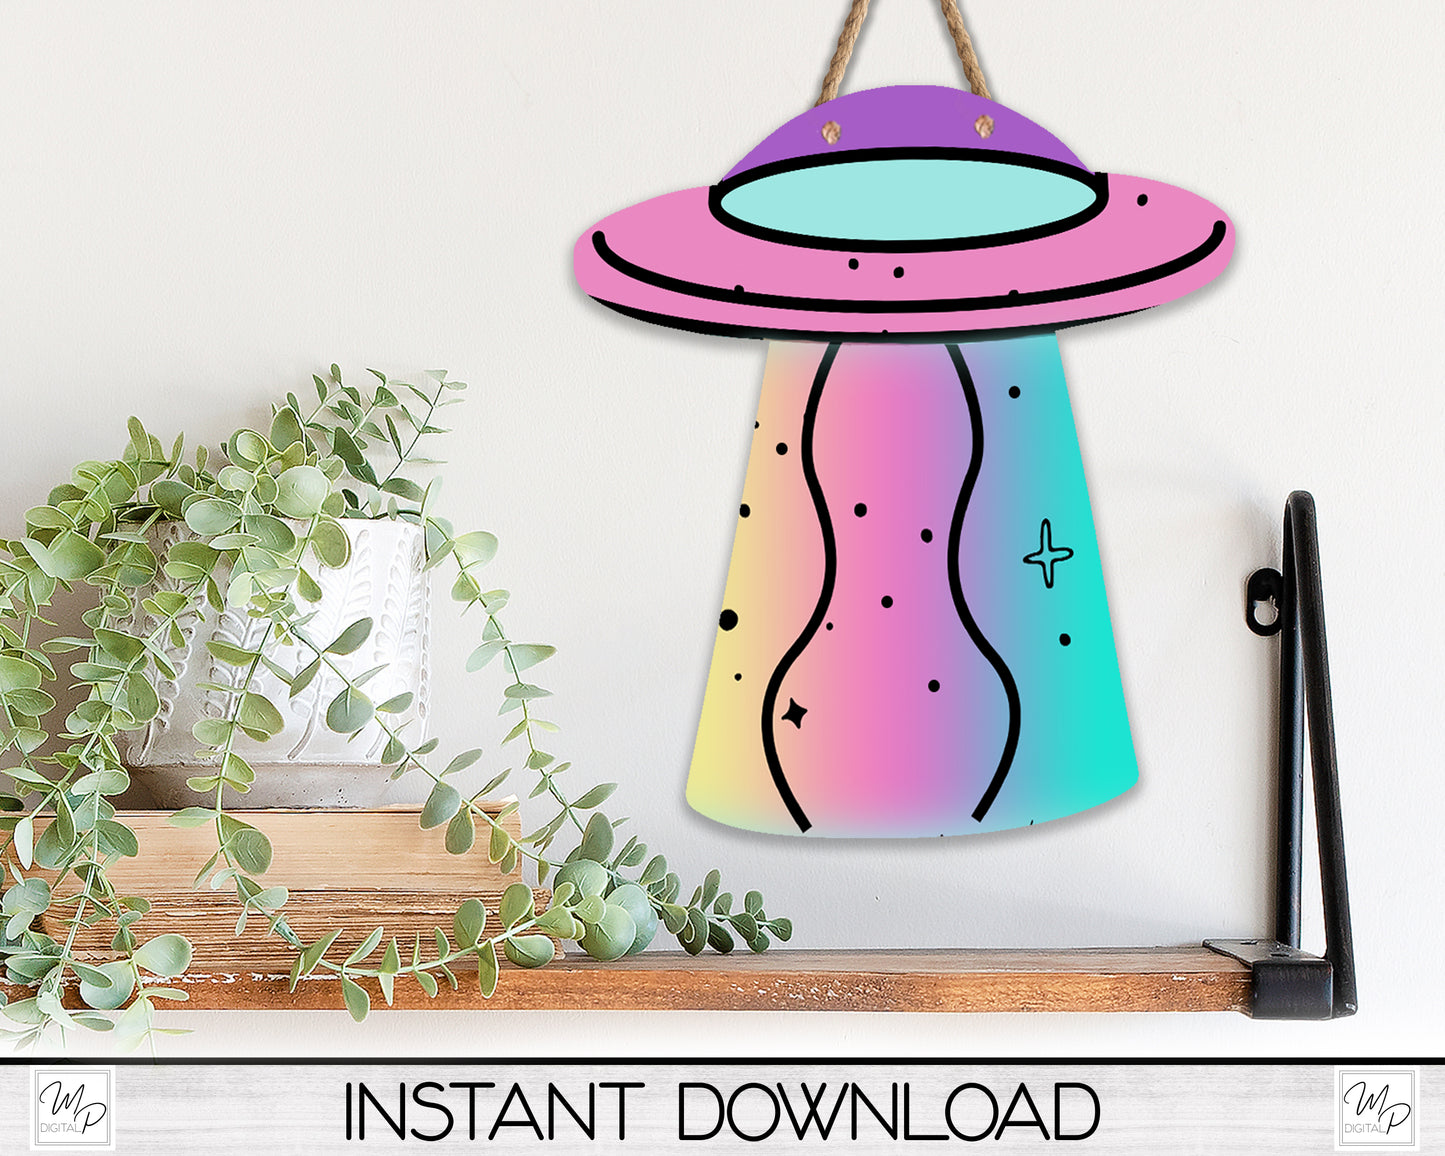 UFO Earring PNG, Designs for Sublimation, Alien Spacecraft, Digital Download